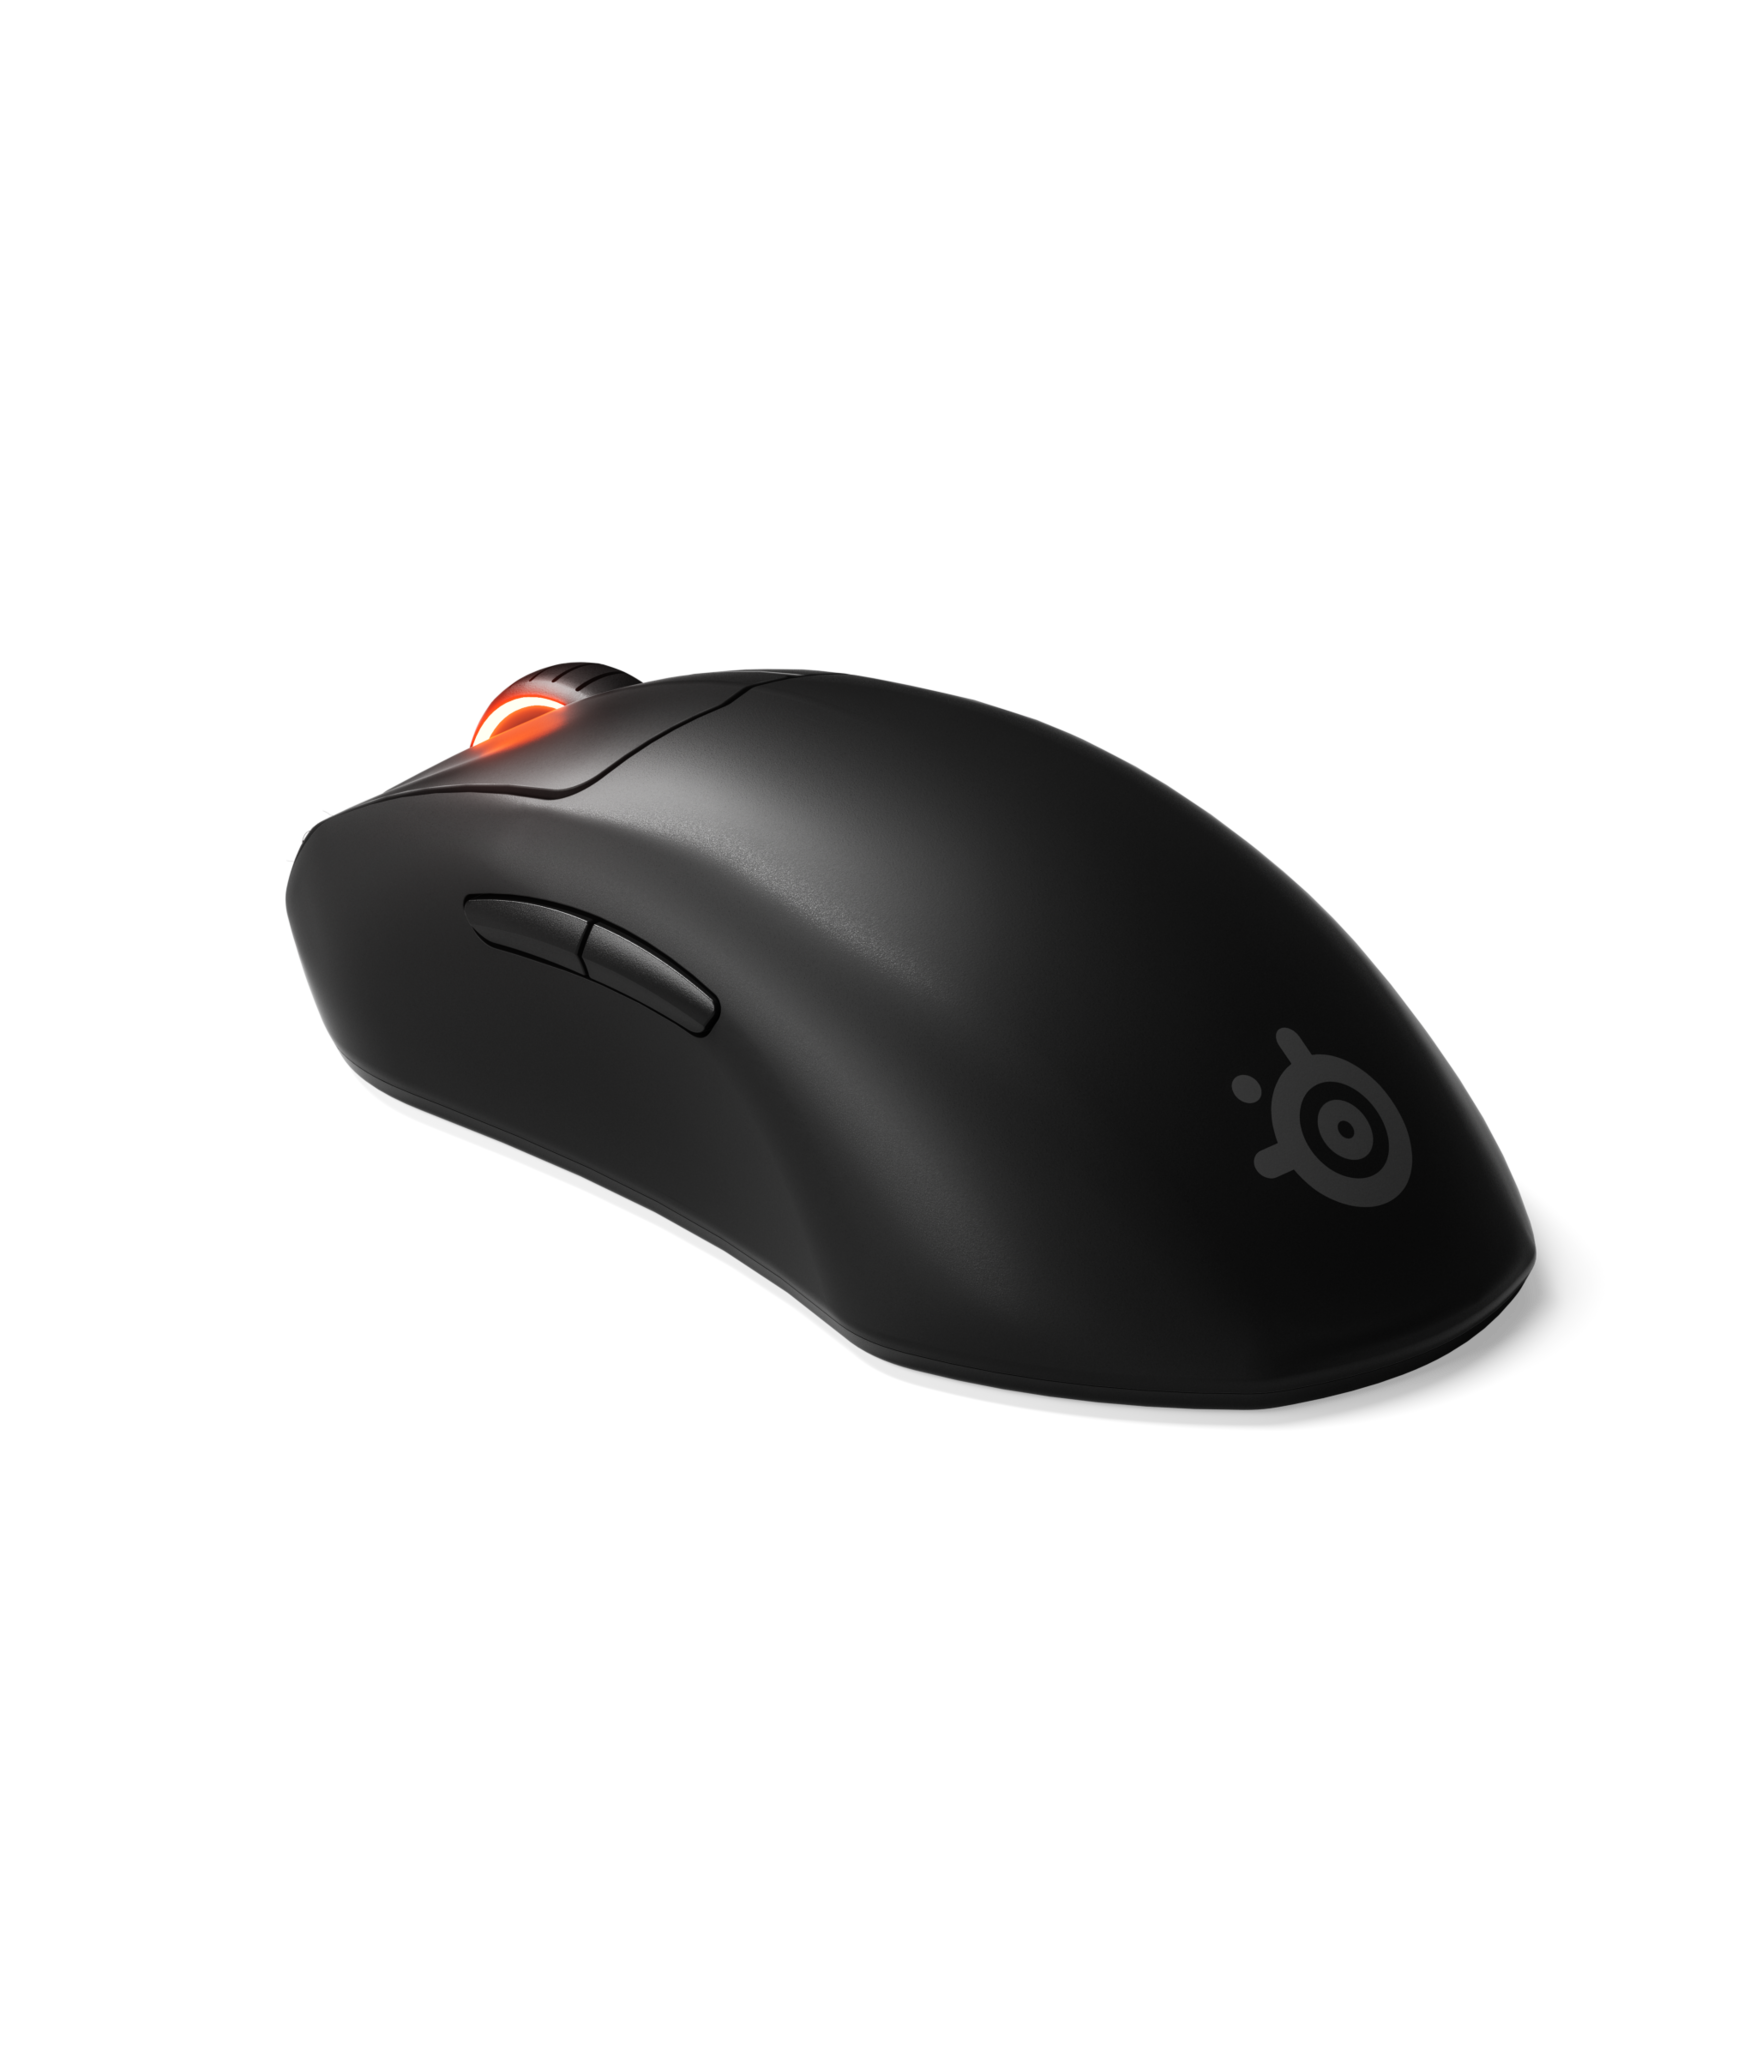 Steelseries - Prime Wireless Gaming Mouse